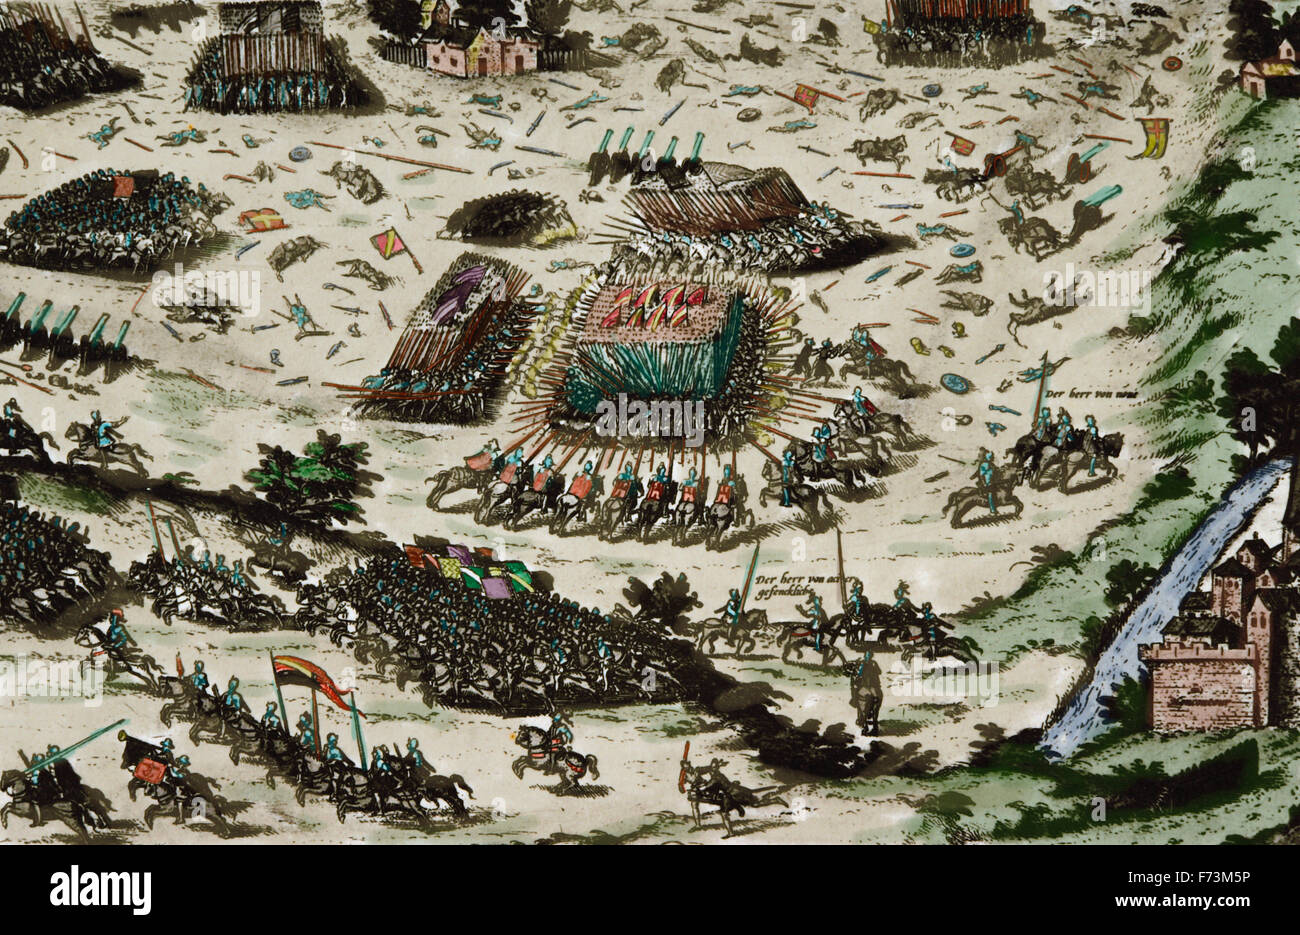 Battle of Moncontour, 3 October 1569, between the Catholic forces of king Charles IX of France and the Huguenots during the Third War (1568-1570) of the French Wars of Religion. Engraving. Colored. Stock Photo